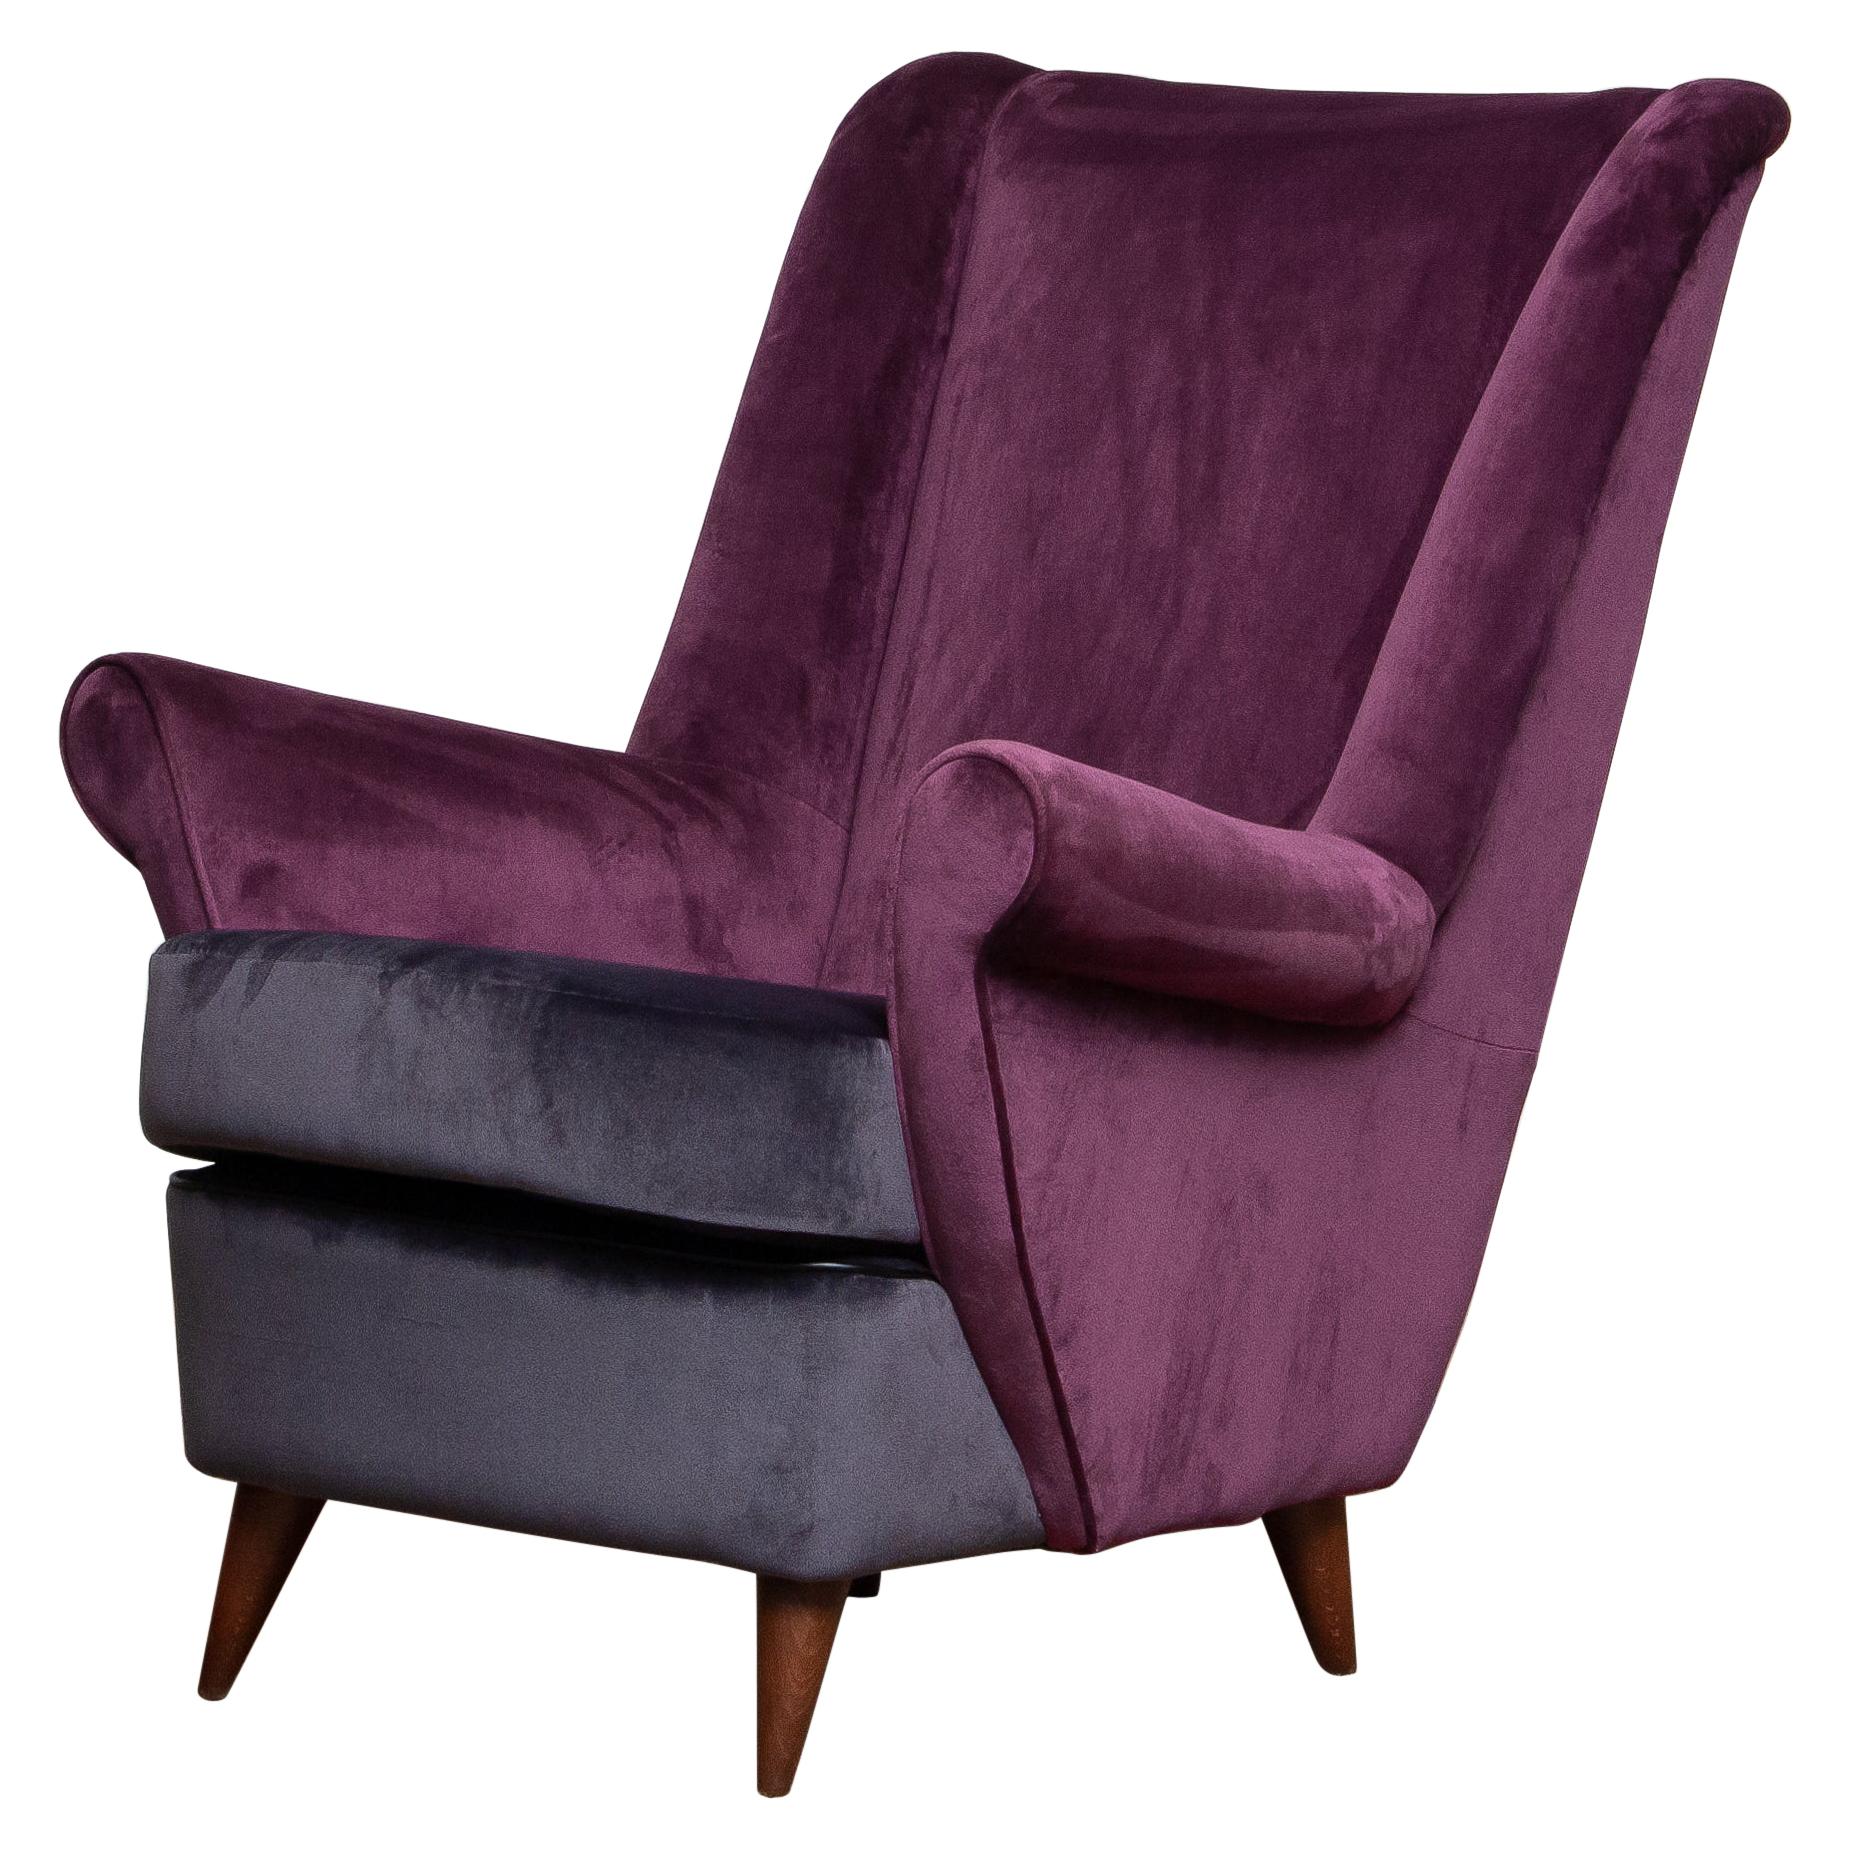 Mid-Century Modern 1950 Lounge / Easy Chair in Magenta by Designed Gio Ponti for ISA Bergamo, Italy